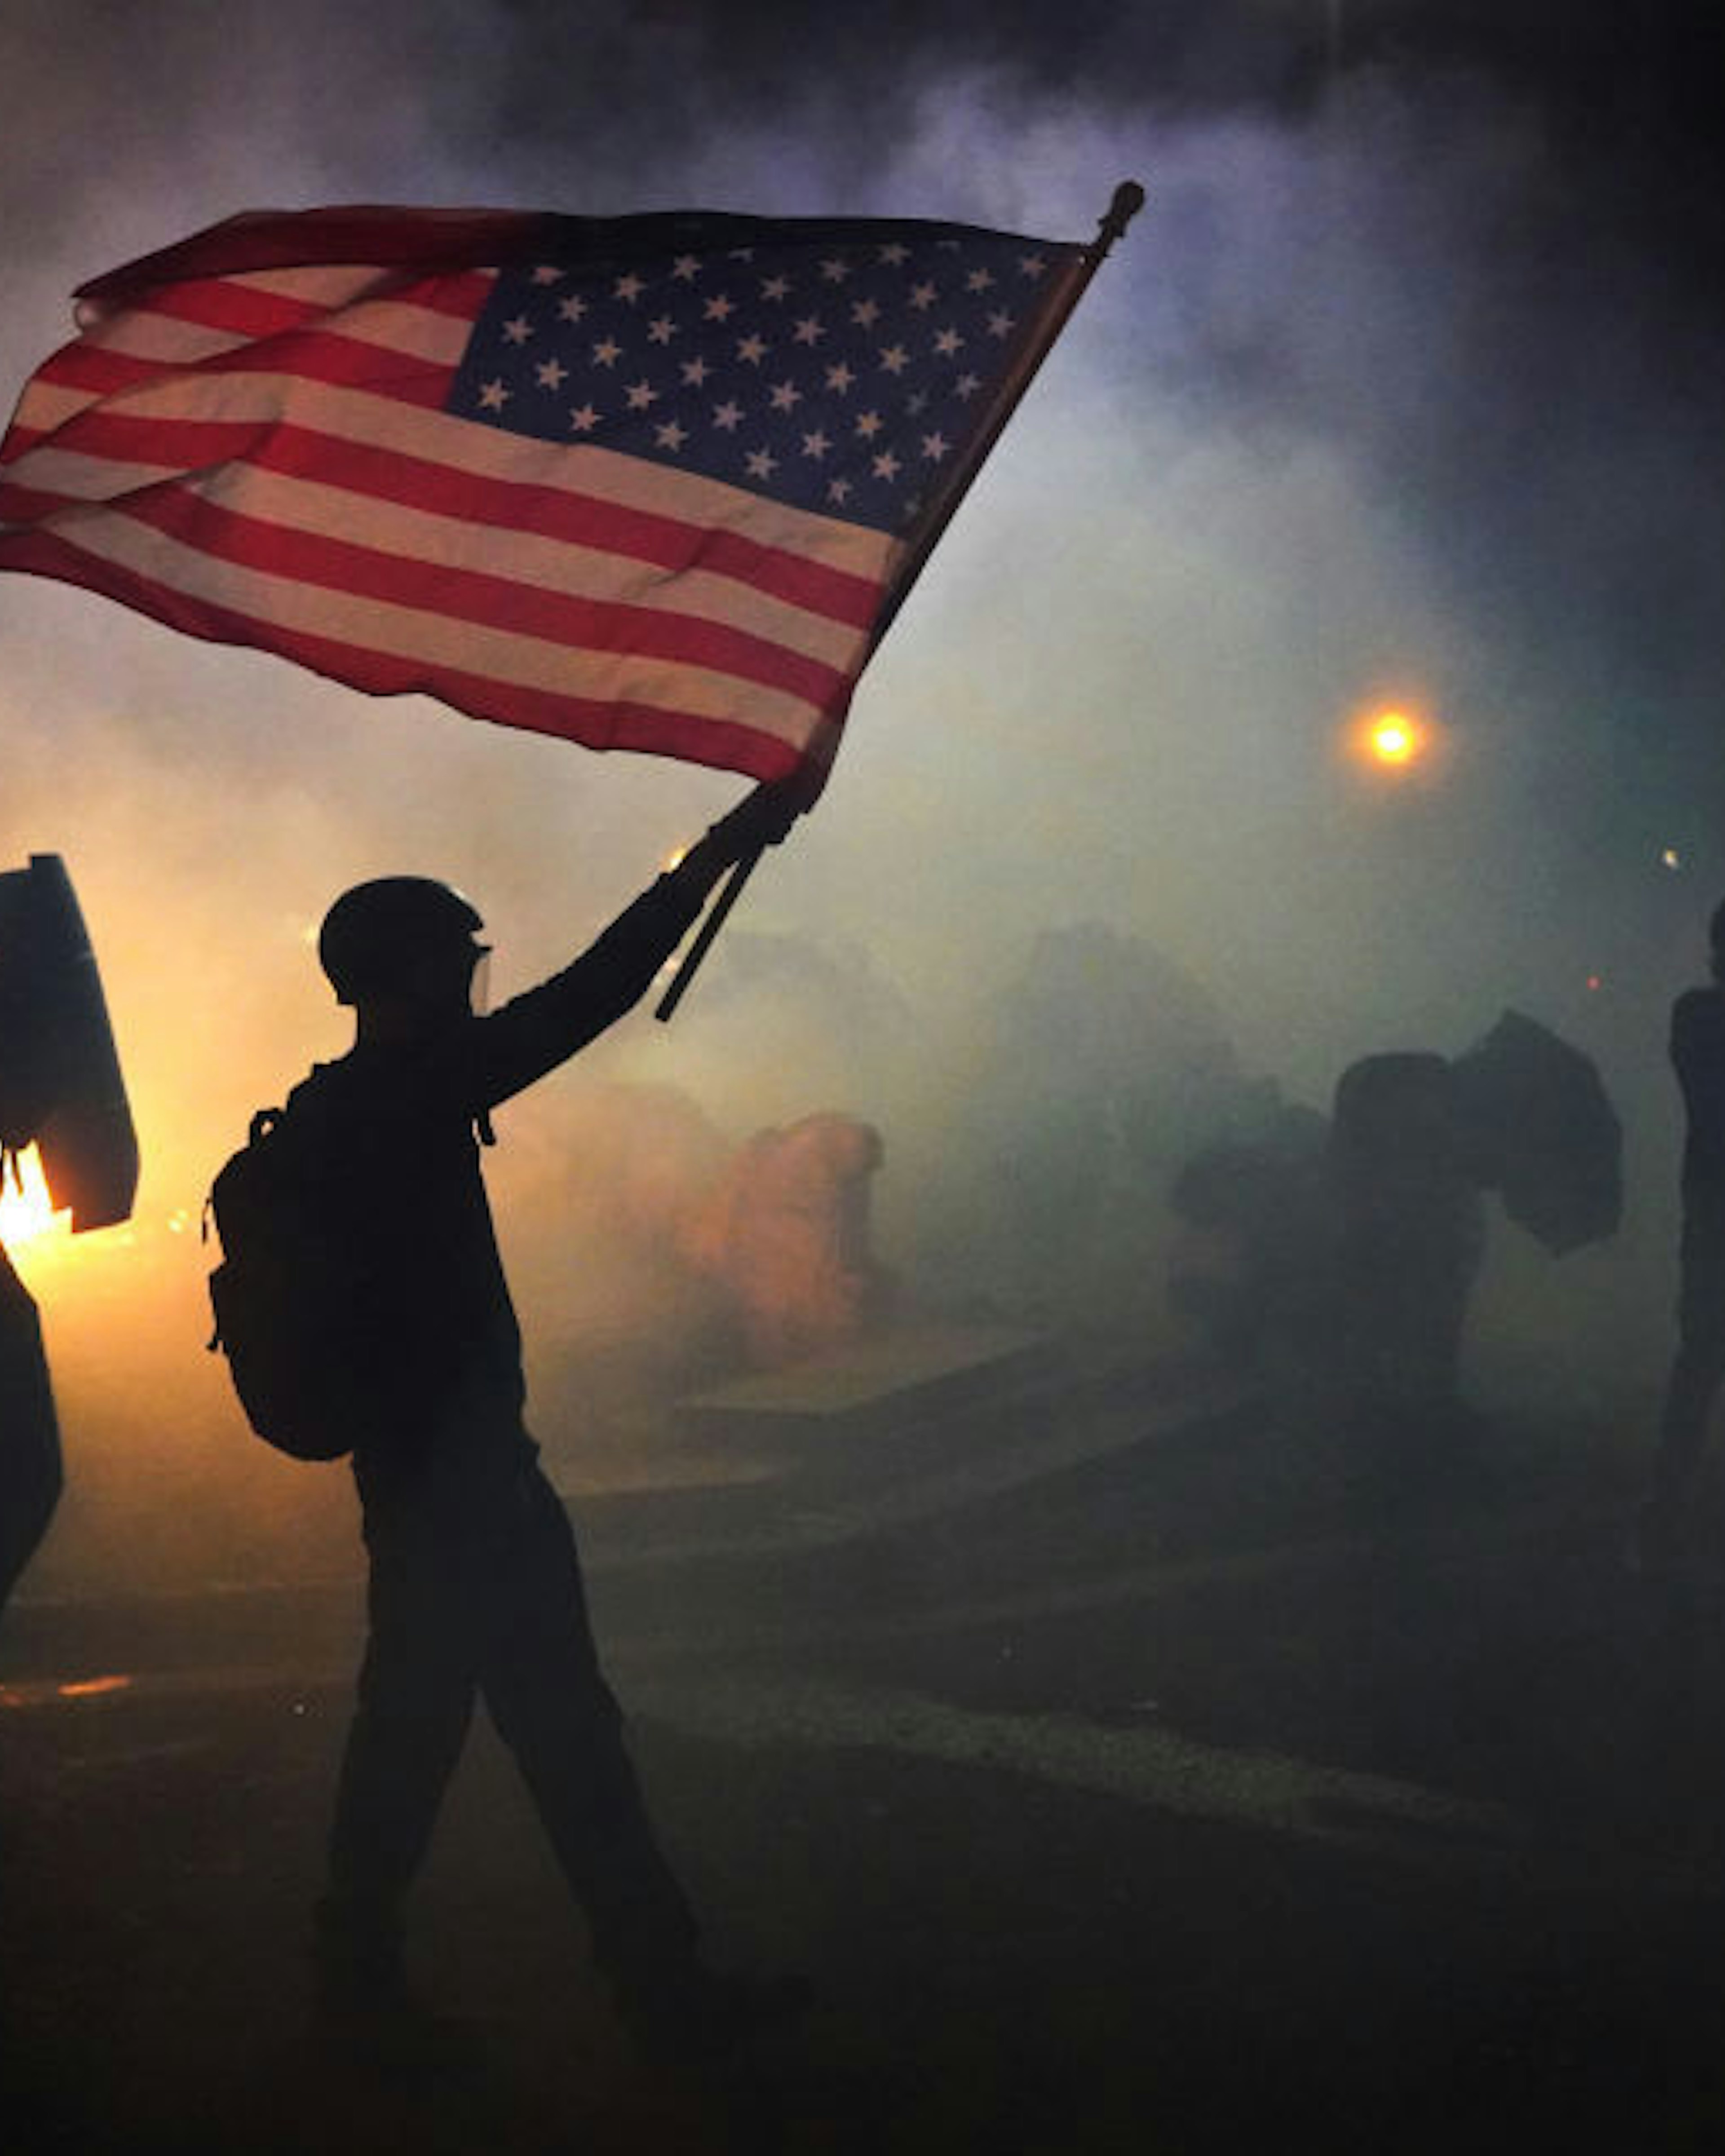 A protester flies an American flag while walking through tear gas fired by federal officers during a protest in front of the Mark O. Hatfield U.S. Courthouse on July 21, 2020 in Portland, Oregon. The federal police response to the ongoing protests against racial inequality has been criticized by city and state elected officials. (Photo by Nathan Howard/Getty Images)